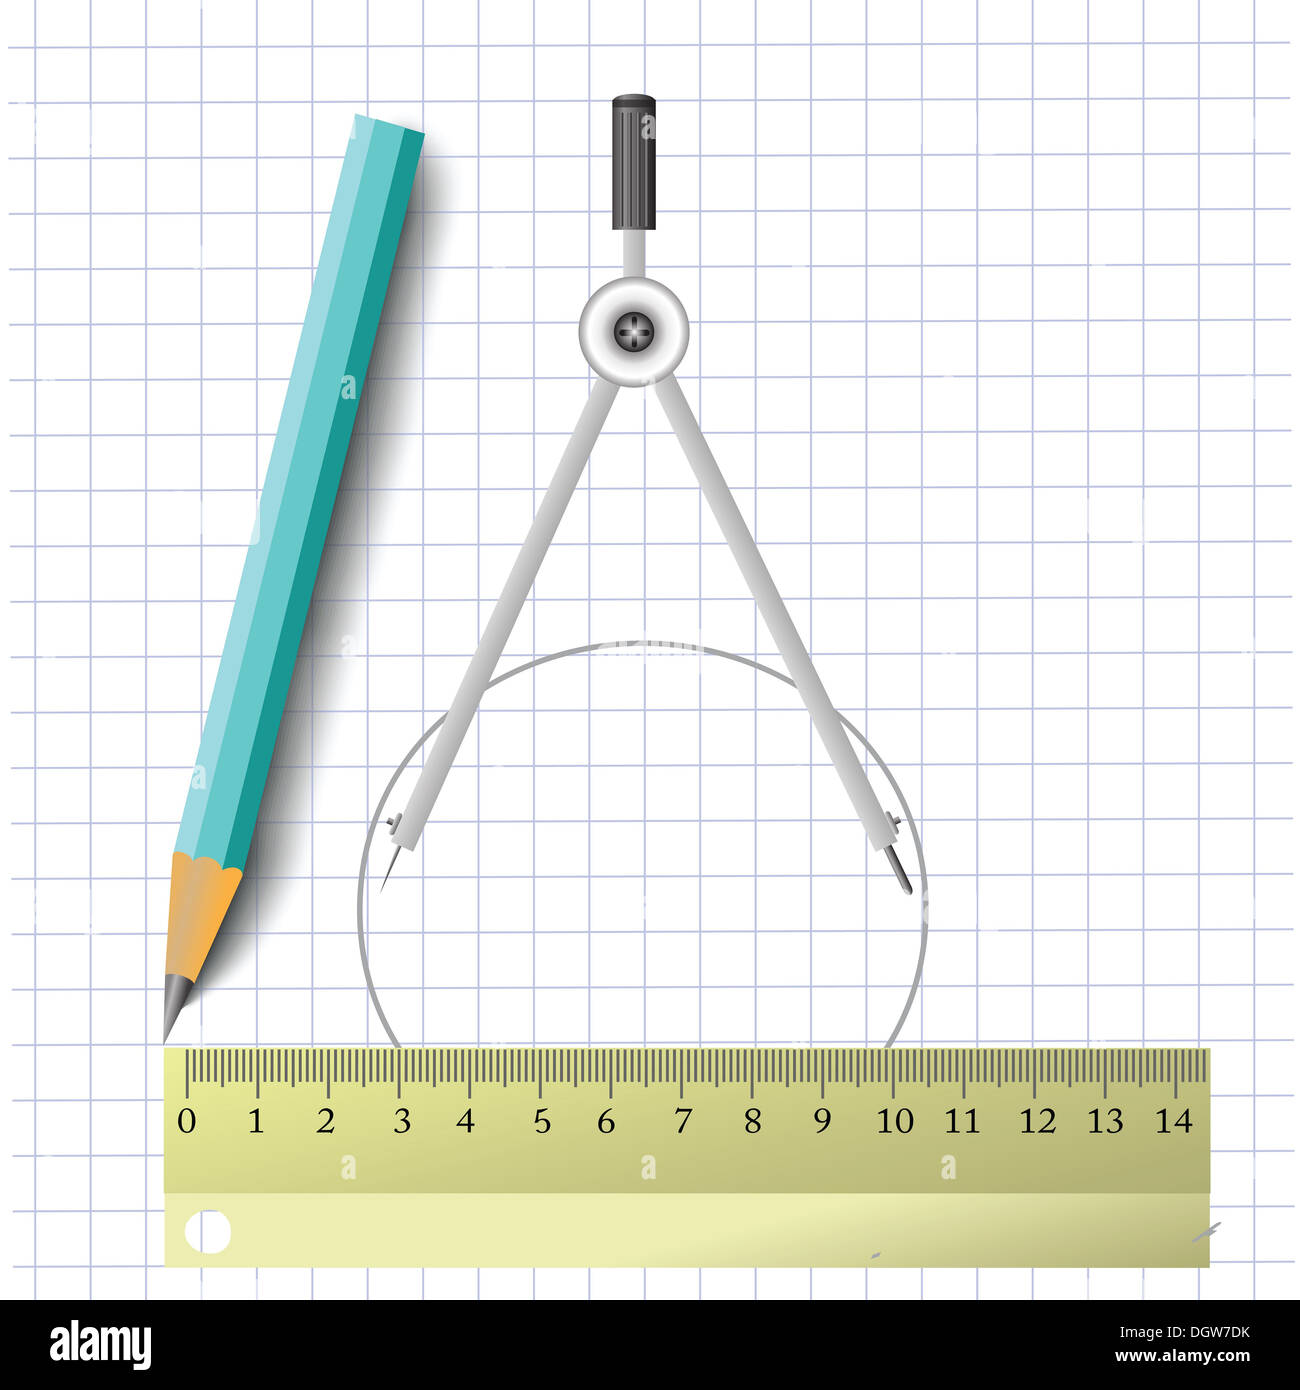 Technical Drawing Tool, compas, technical Drawing, Compass, Architecture,  technic, triangle, Point, Silhouette, drawing